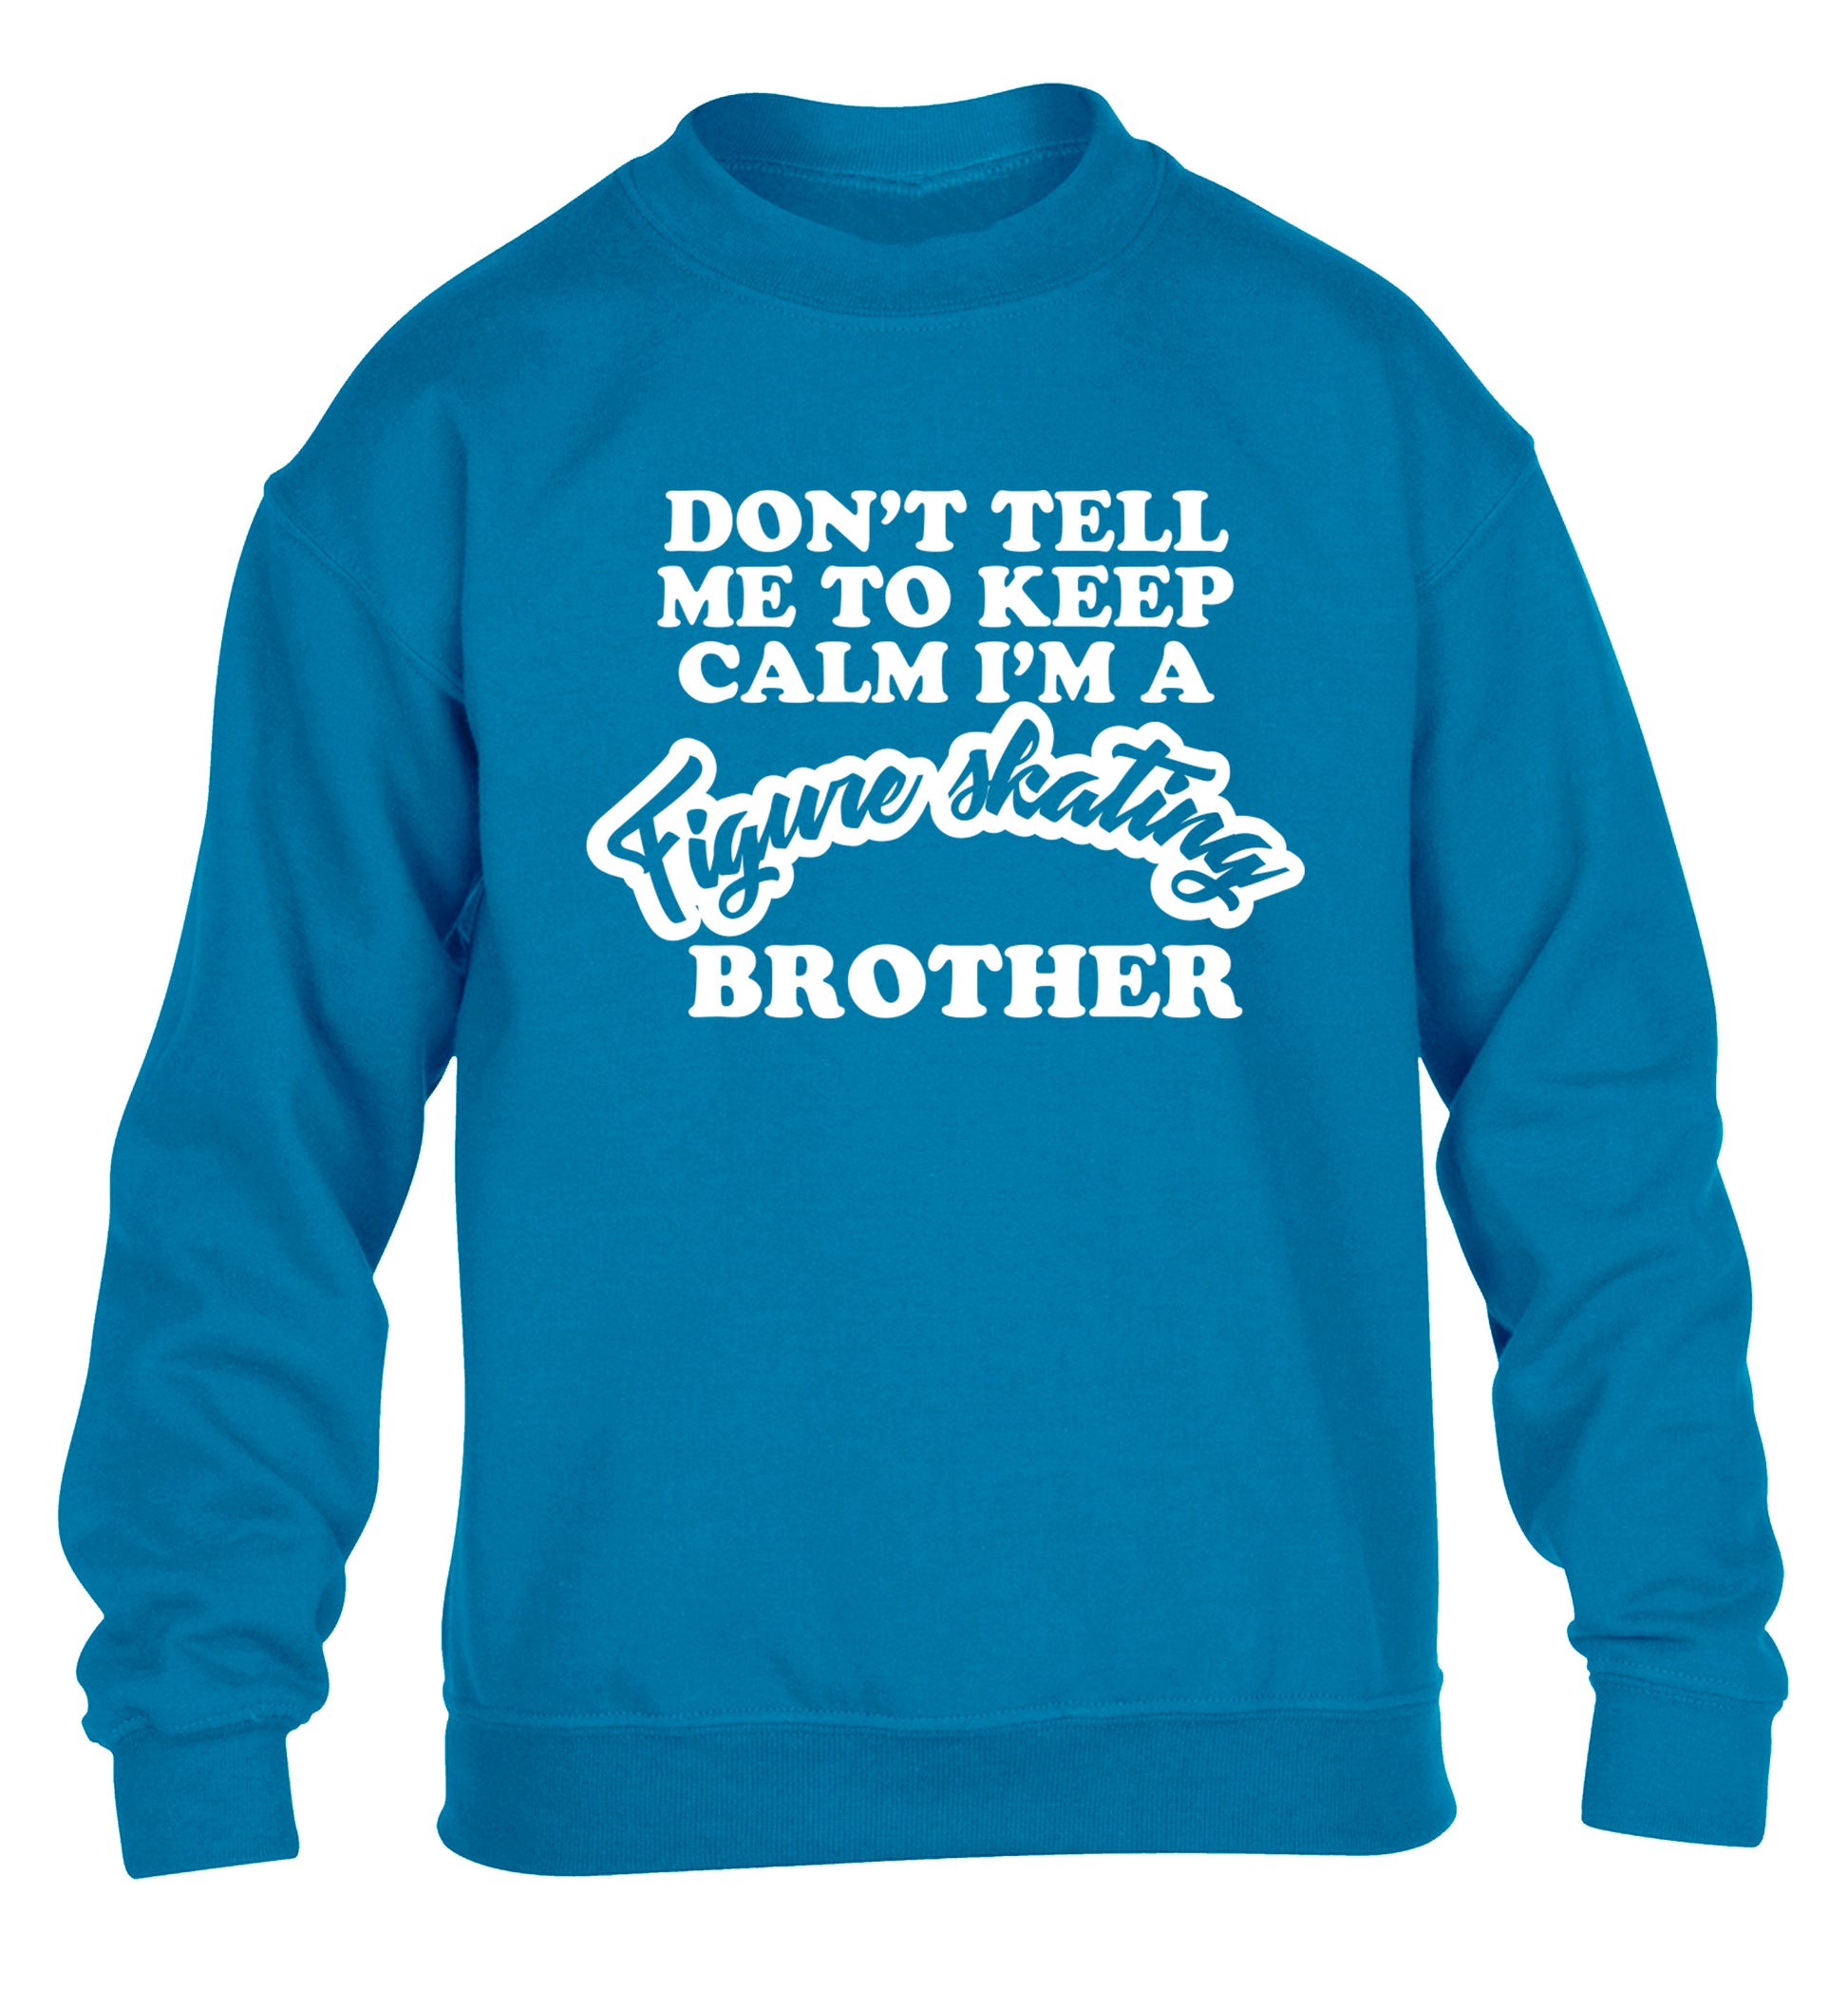 Don't tell me to keep calm I'm a figure skating brother children's blue sweater 12-14 Years